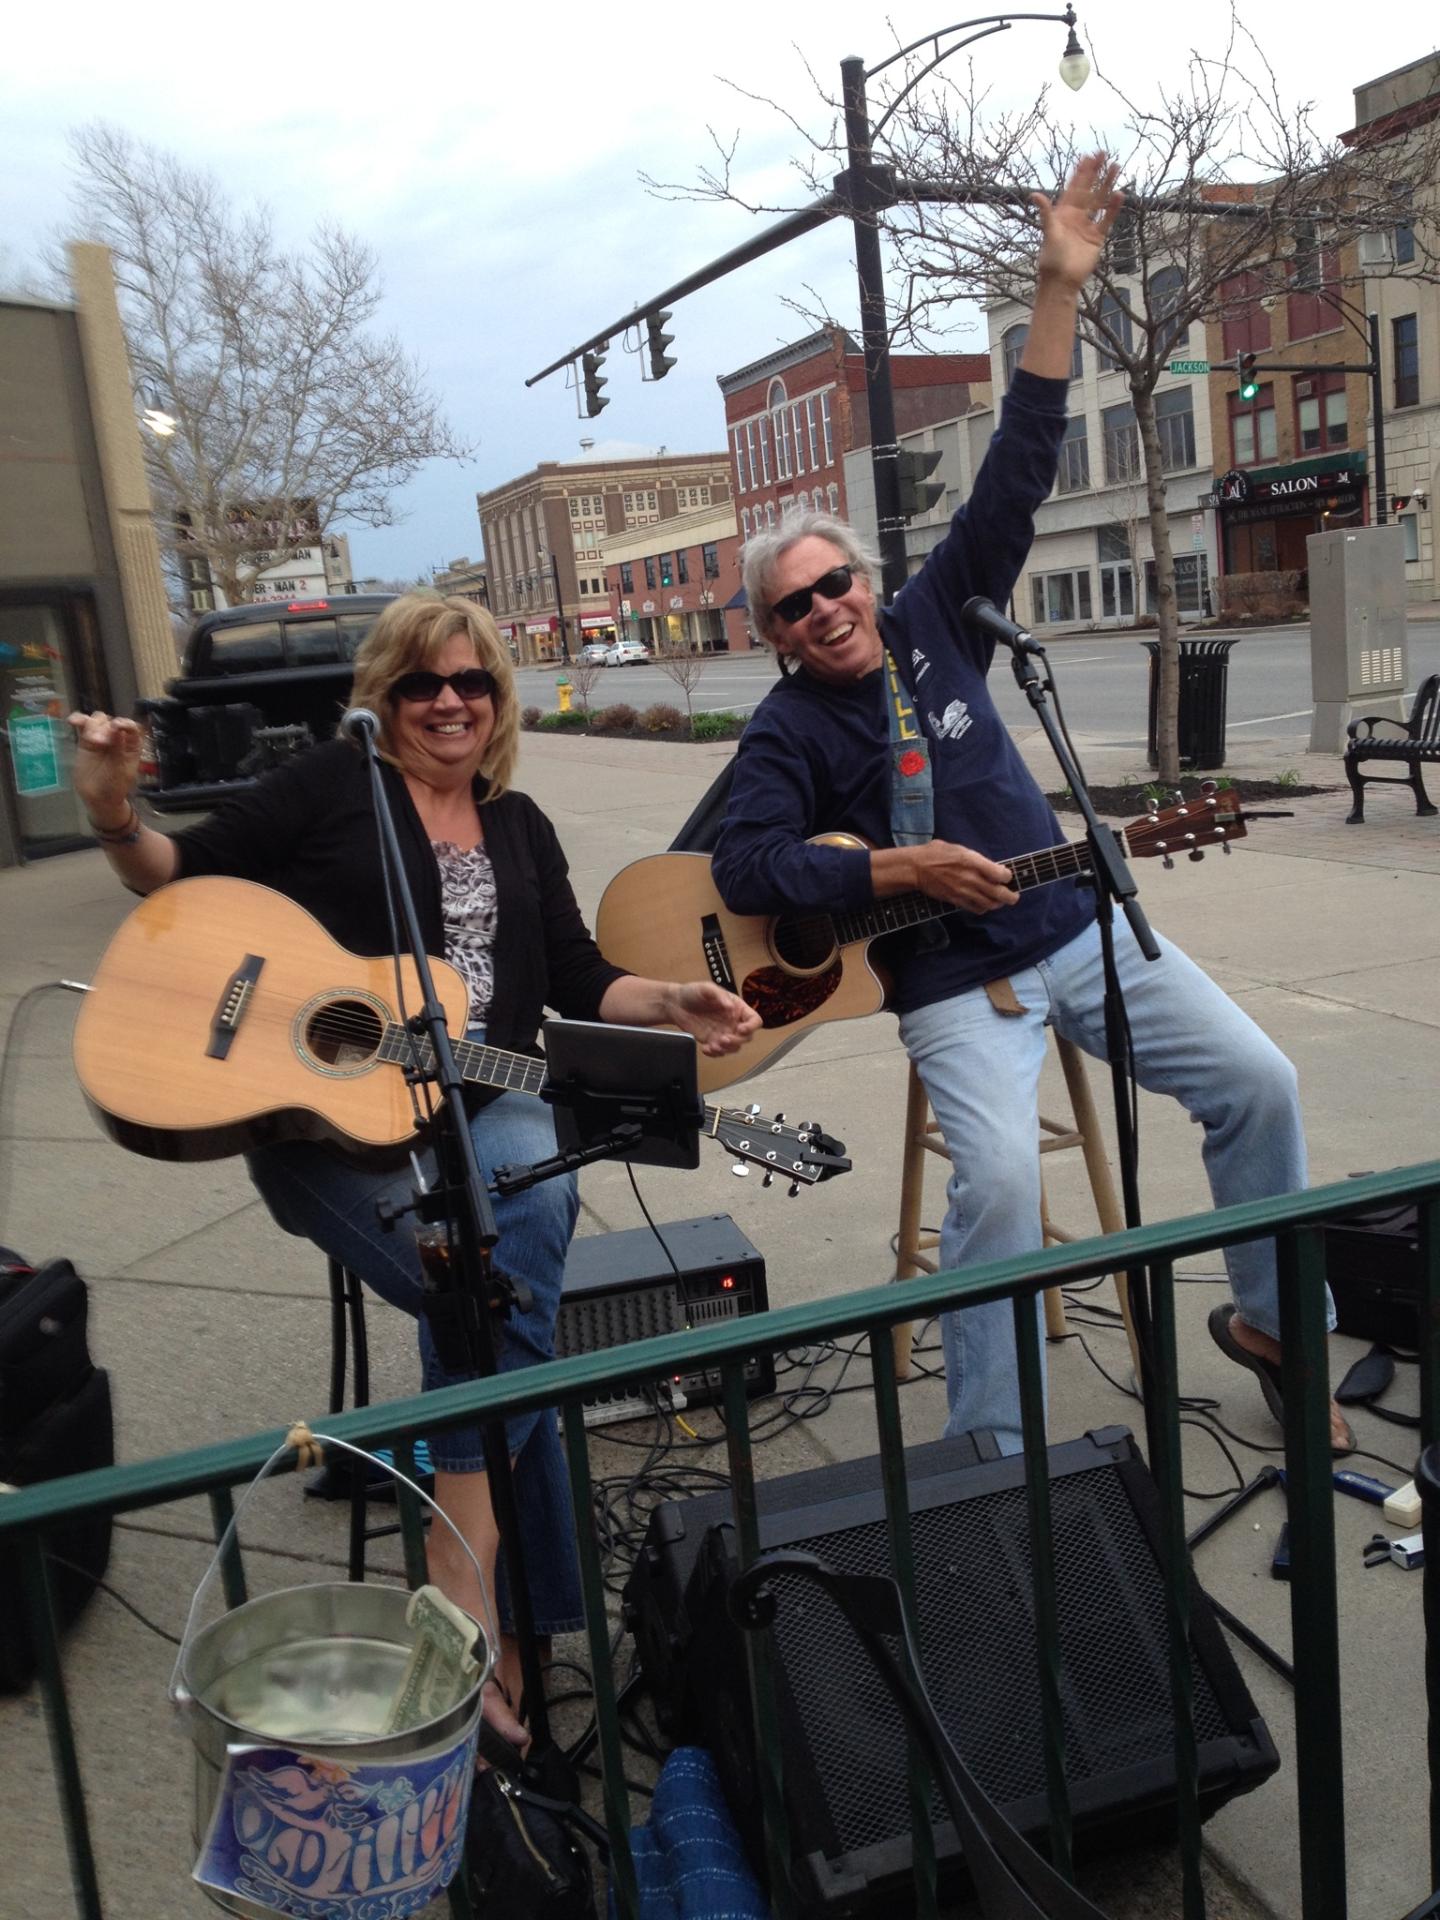 The Traveling Towpath Troubadours (Kay and Bill McDonald) will cruise into Lockport on Friday, July 7, for `Fun, Food & Folk,` a free concert on the banks of the Erie Canal. Chiavetta's barbecue chicken dinners will be sold on site.